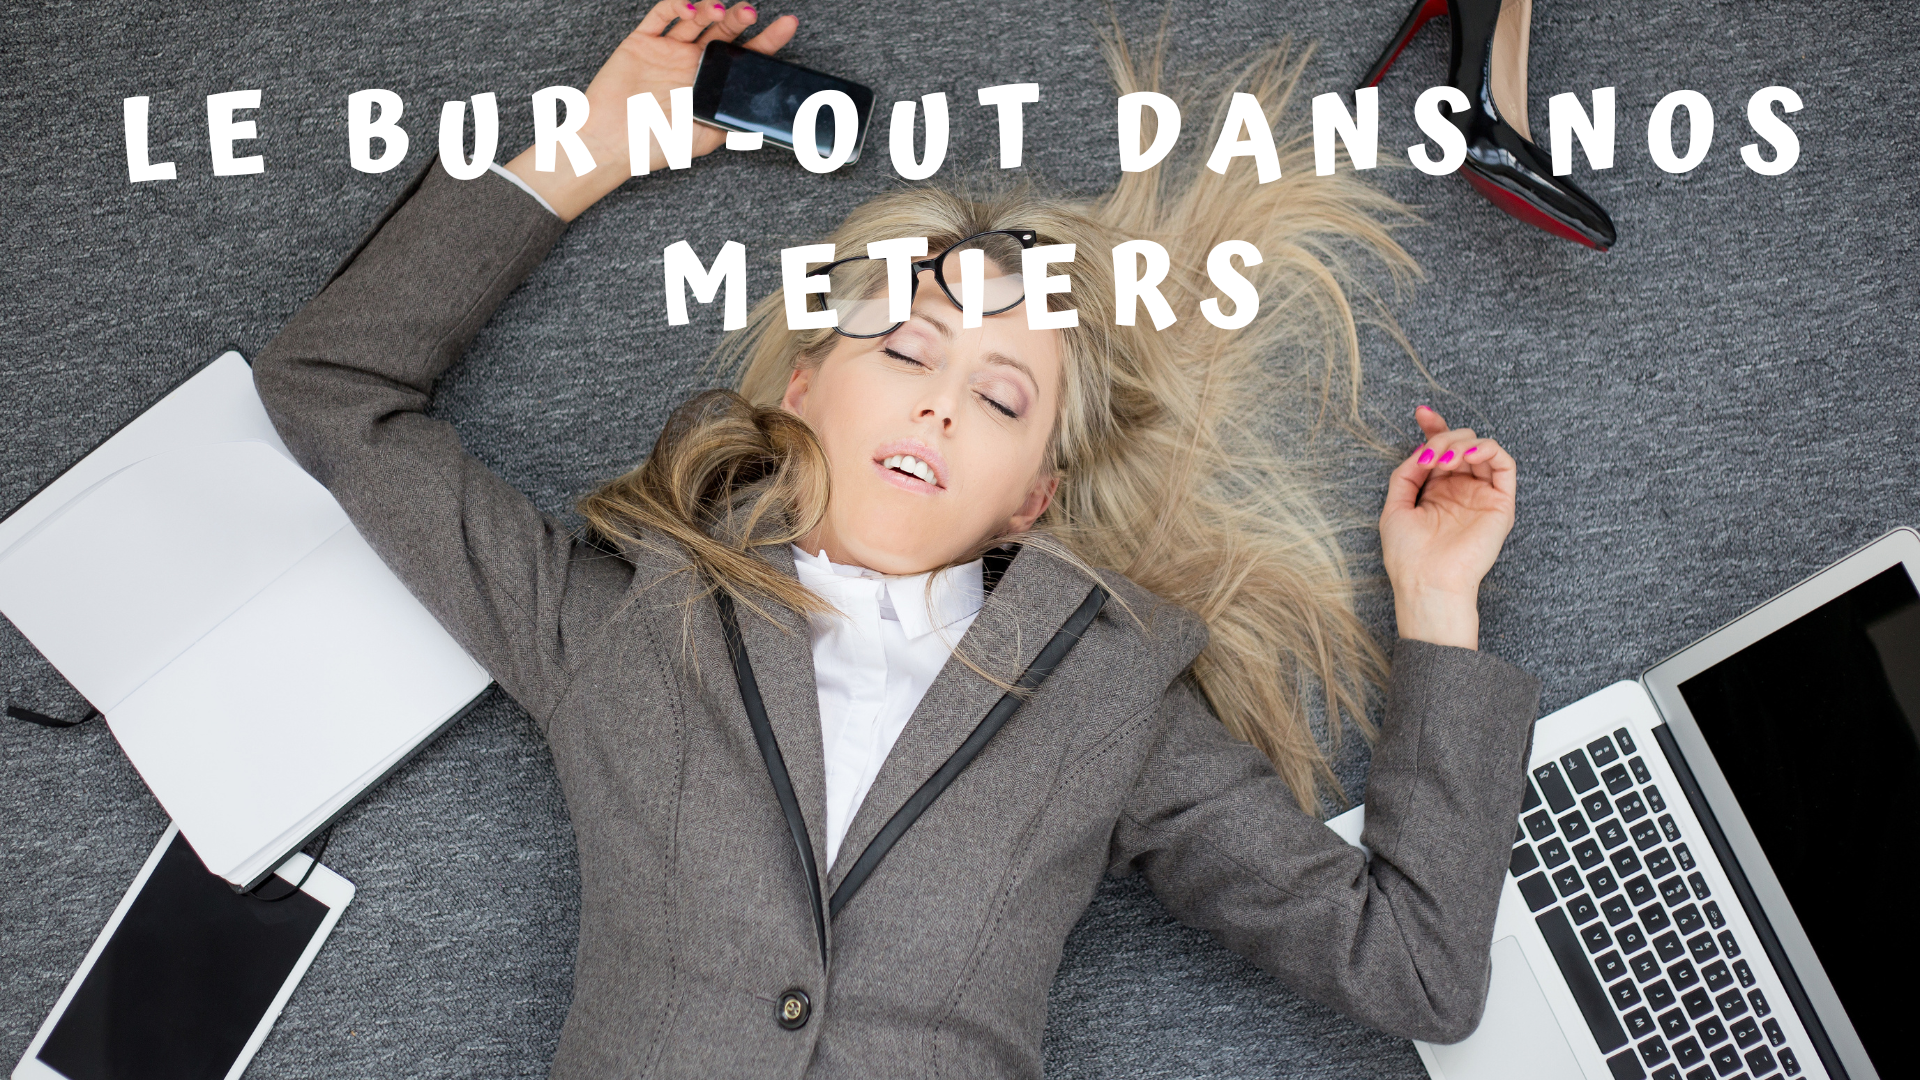 You are currently viewing Le Burn-Out dans nos métiers